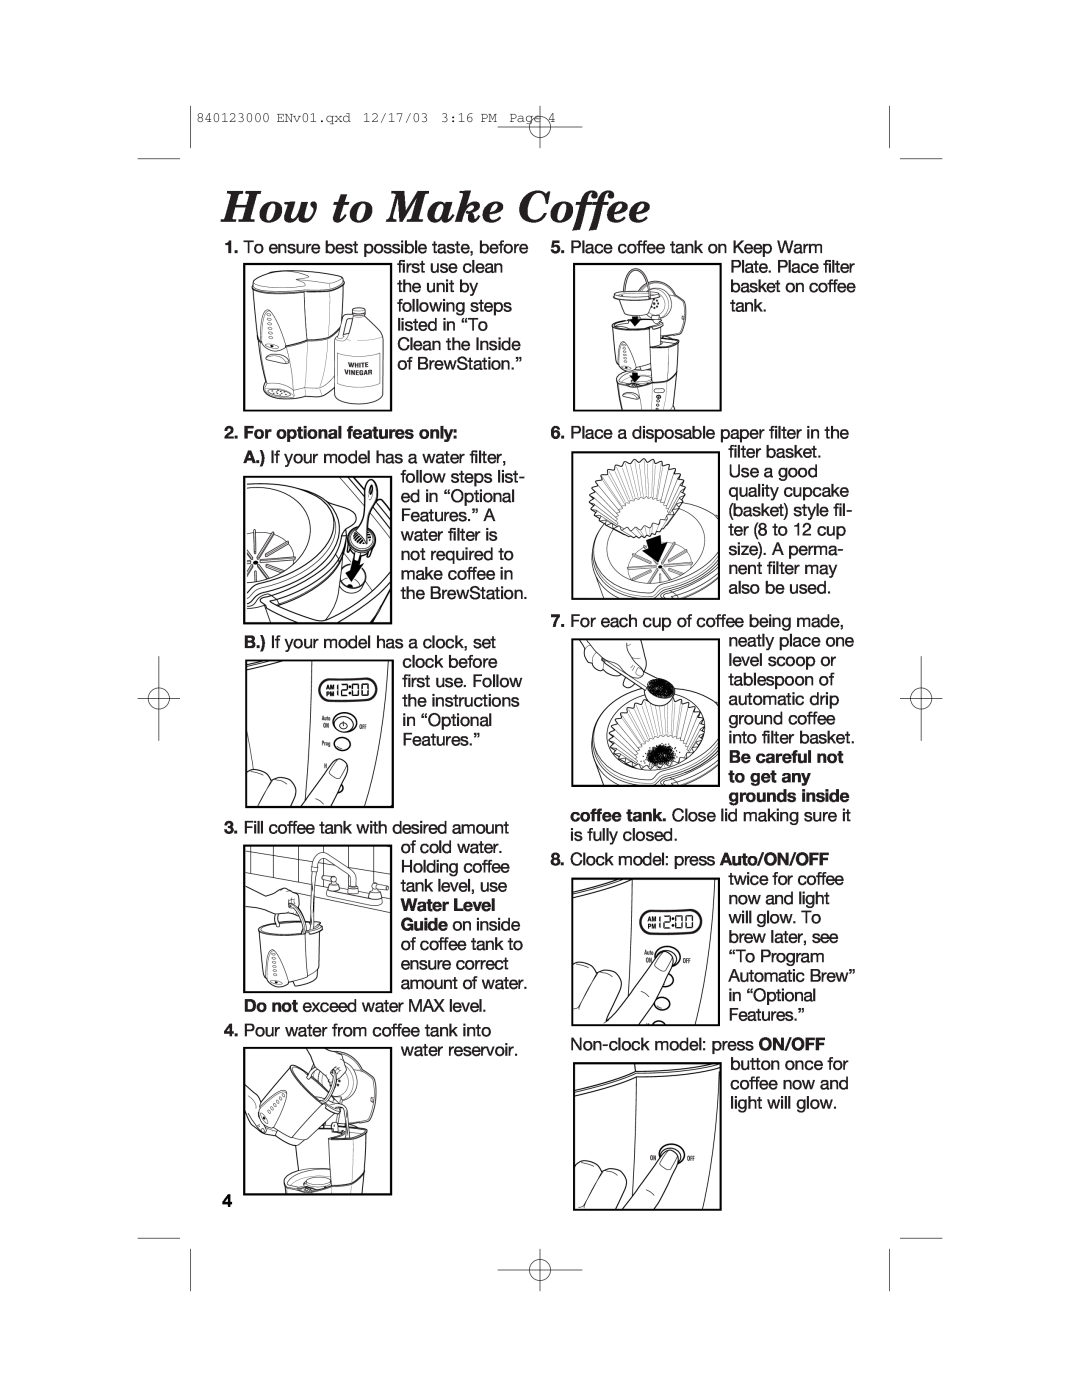 Hamilton Beach 840123000 manual How to Make Coffee, For optional features only, Water Level 